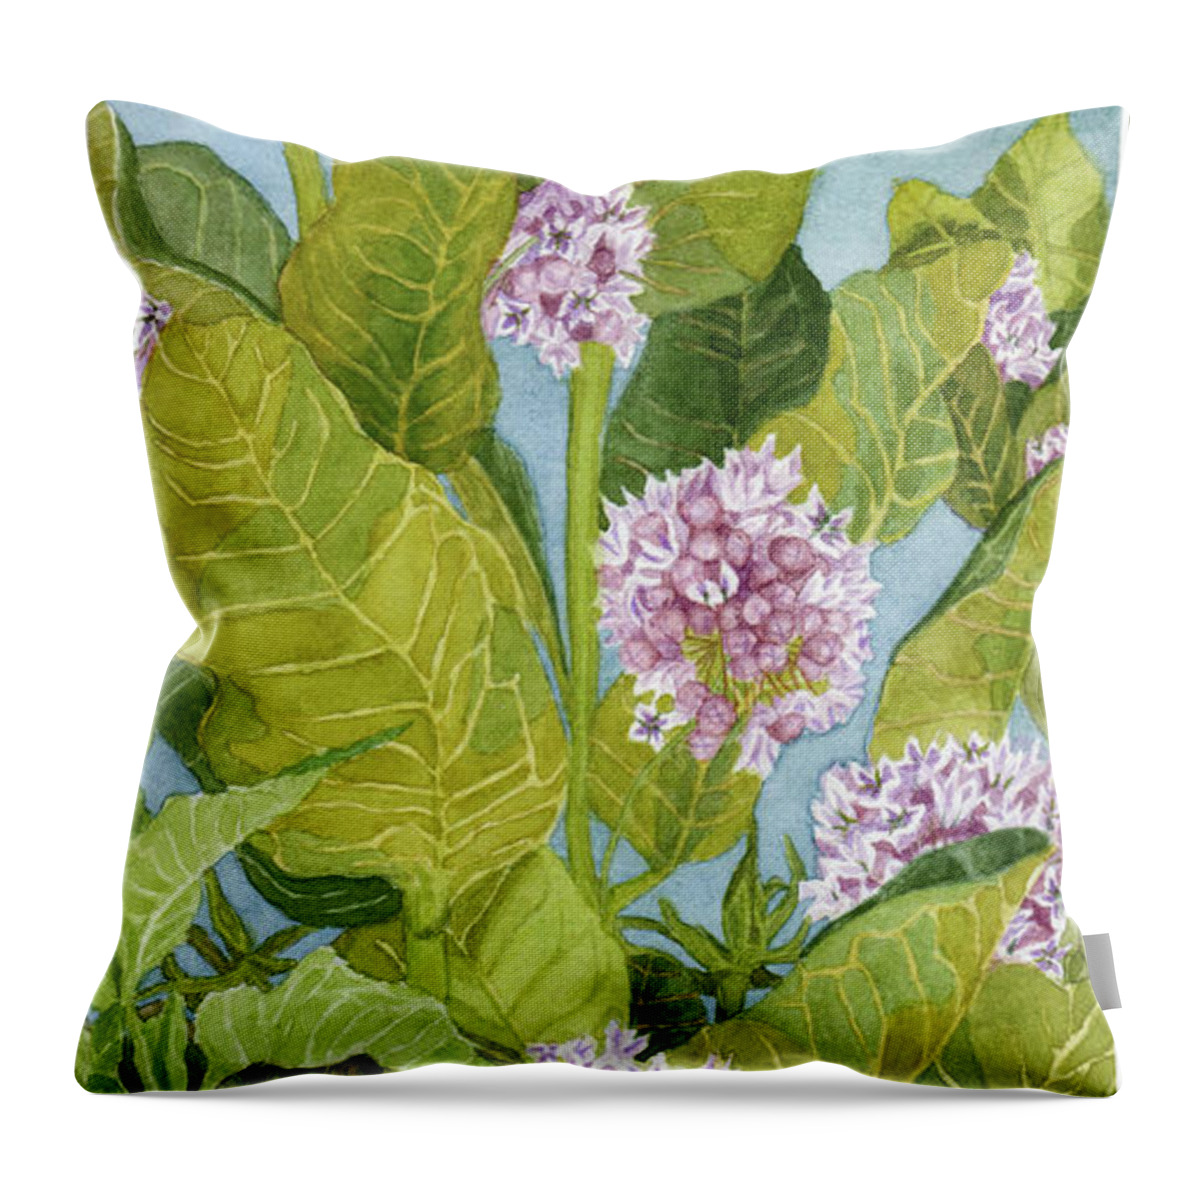 Wolf Road Prairie Throw Pillow featuring the painting Milkweed I by Alice Ann Barnes